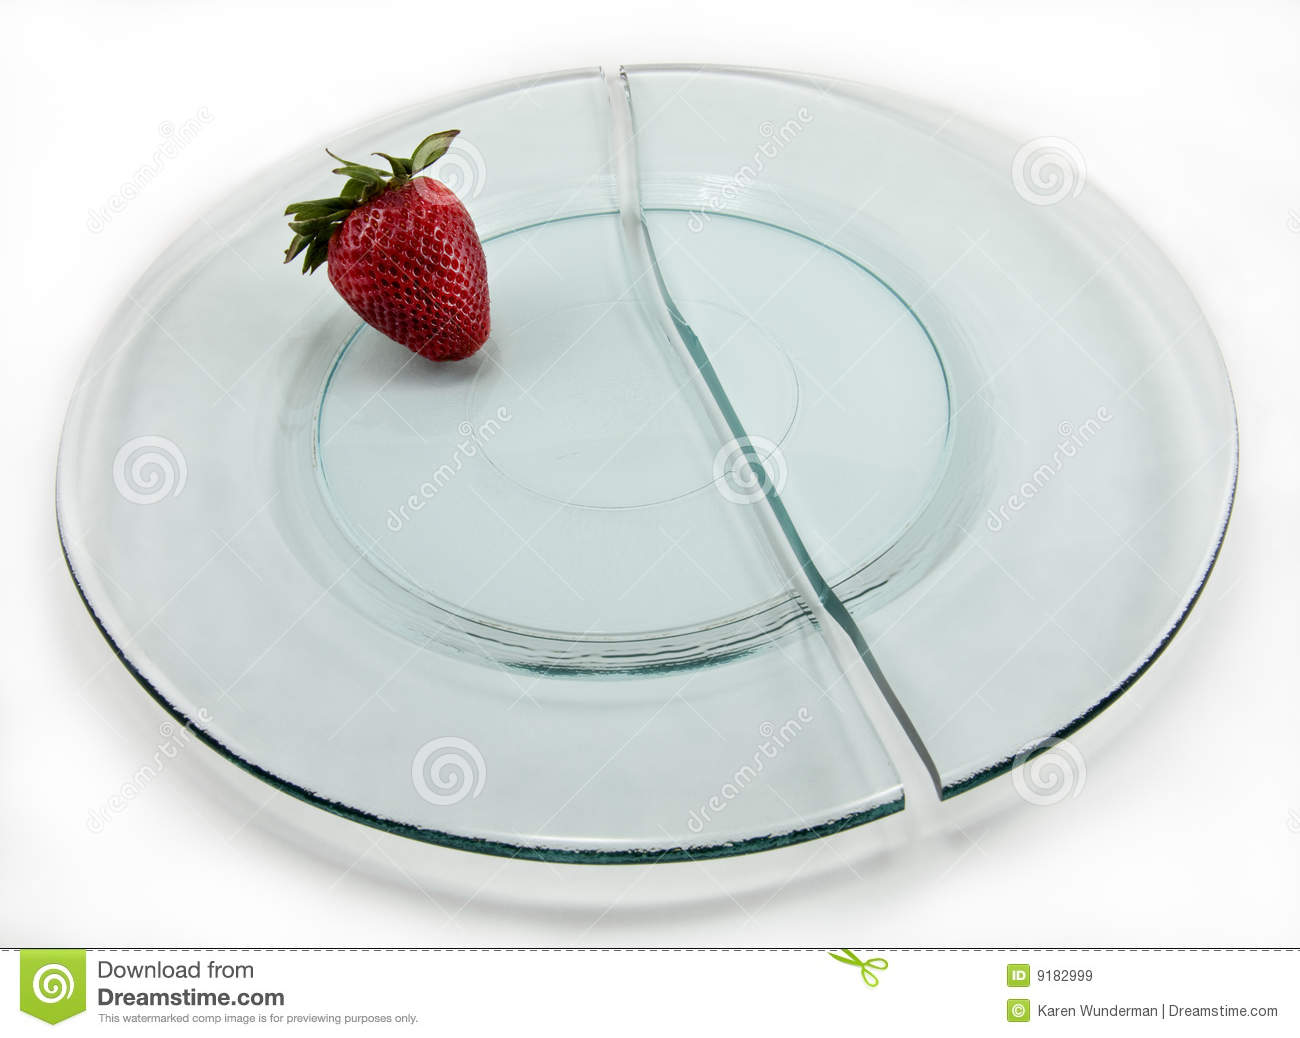 Broken Plate Made Out Of Recycled Glass With A Ripe Strawberry On It